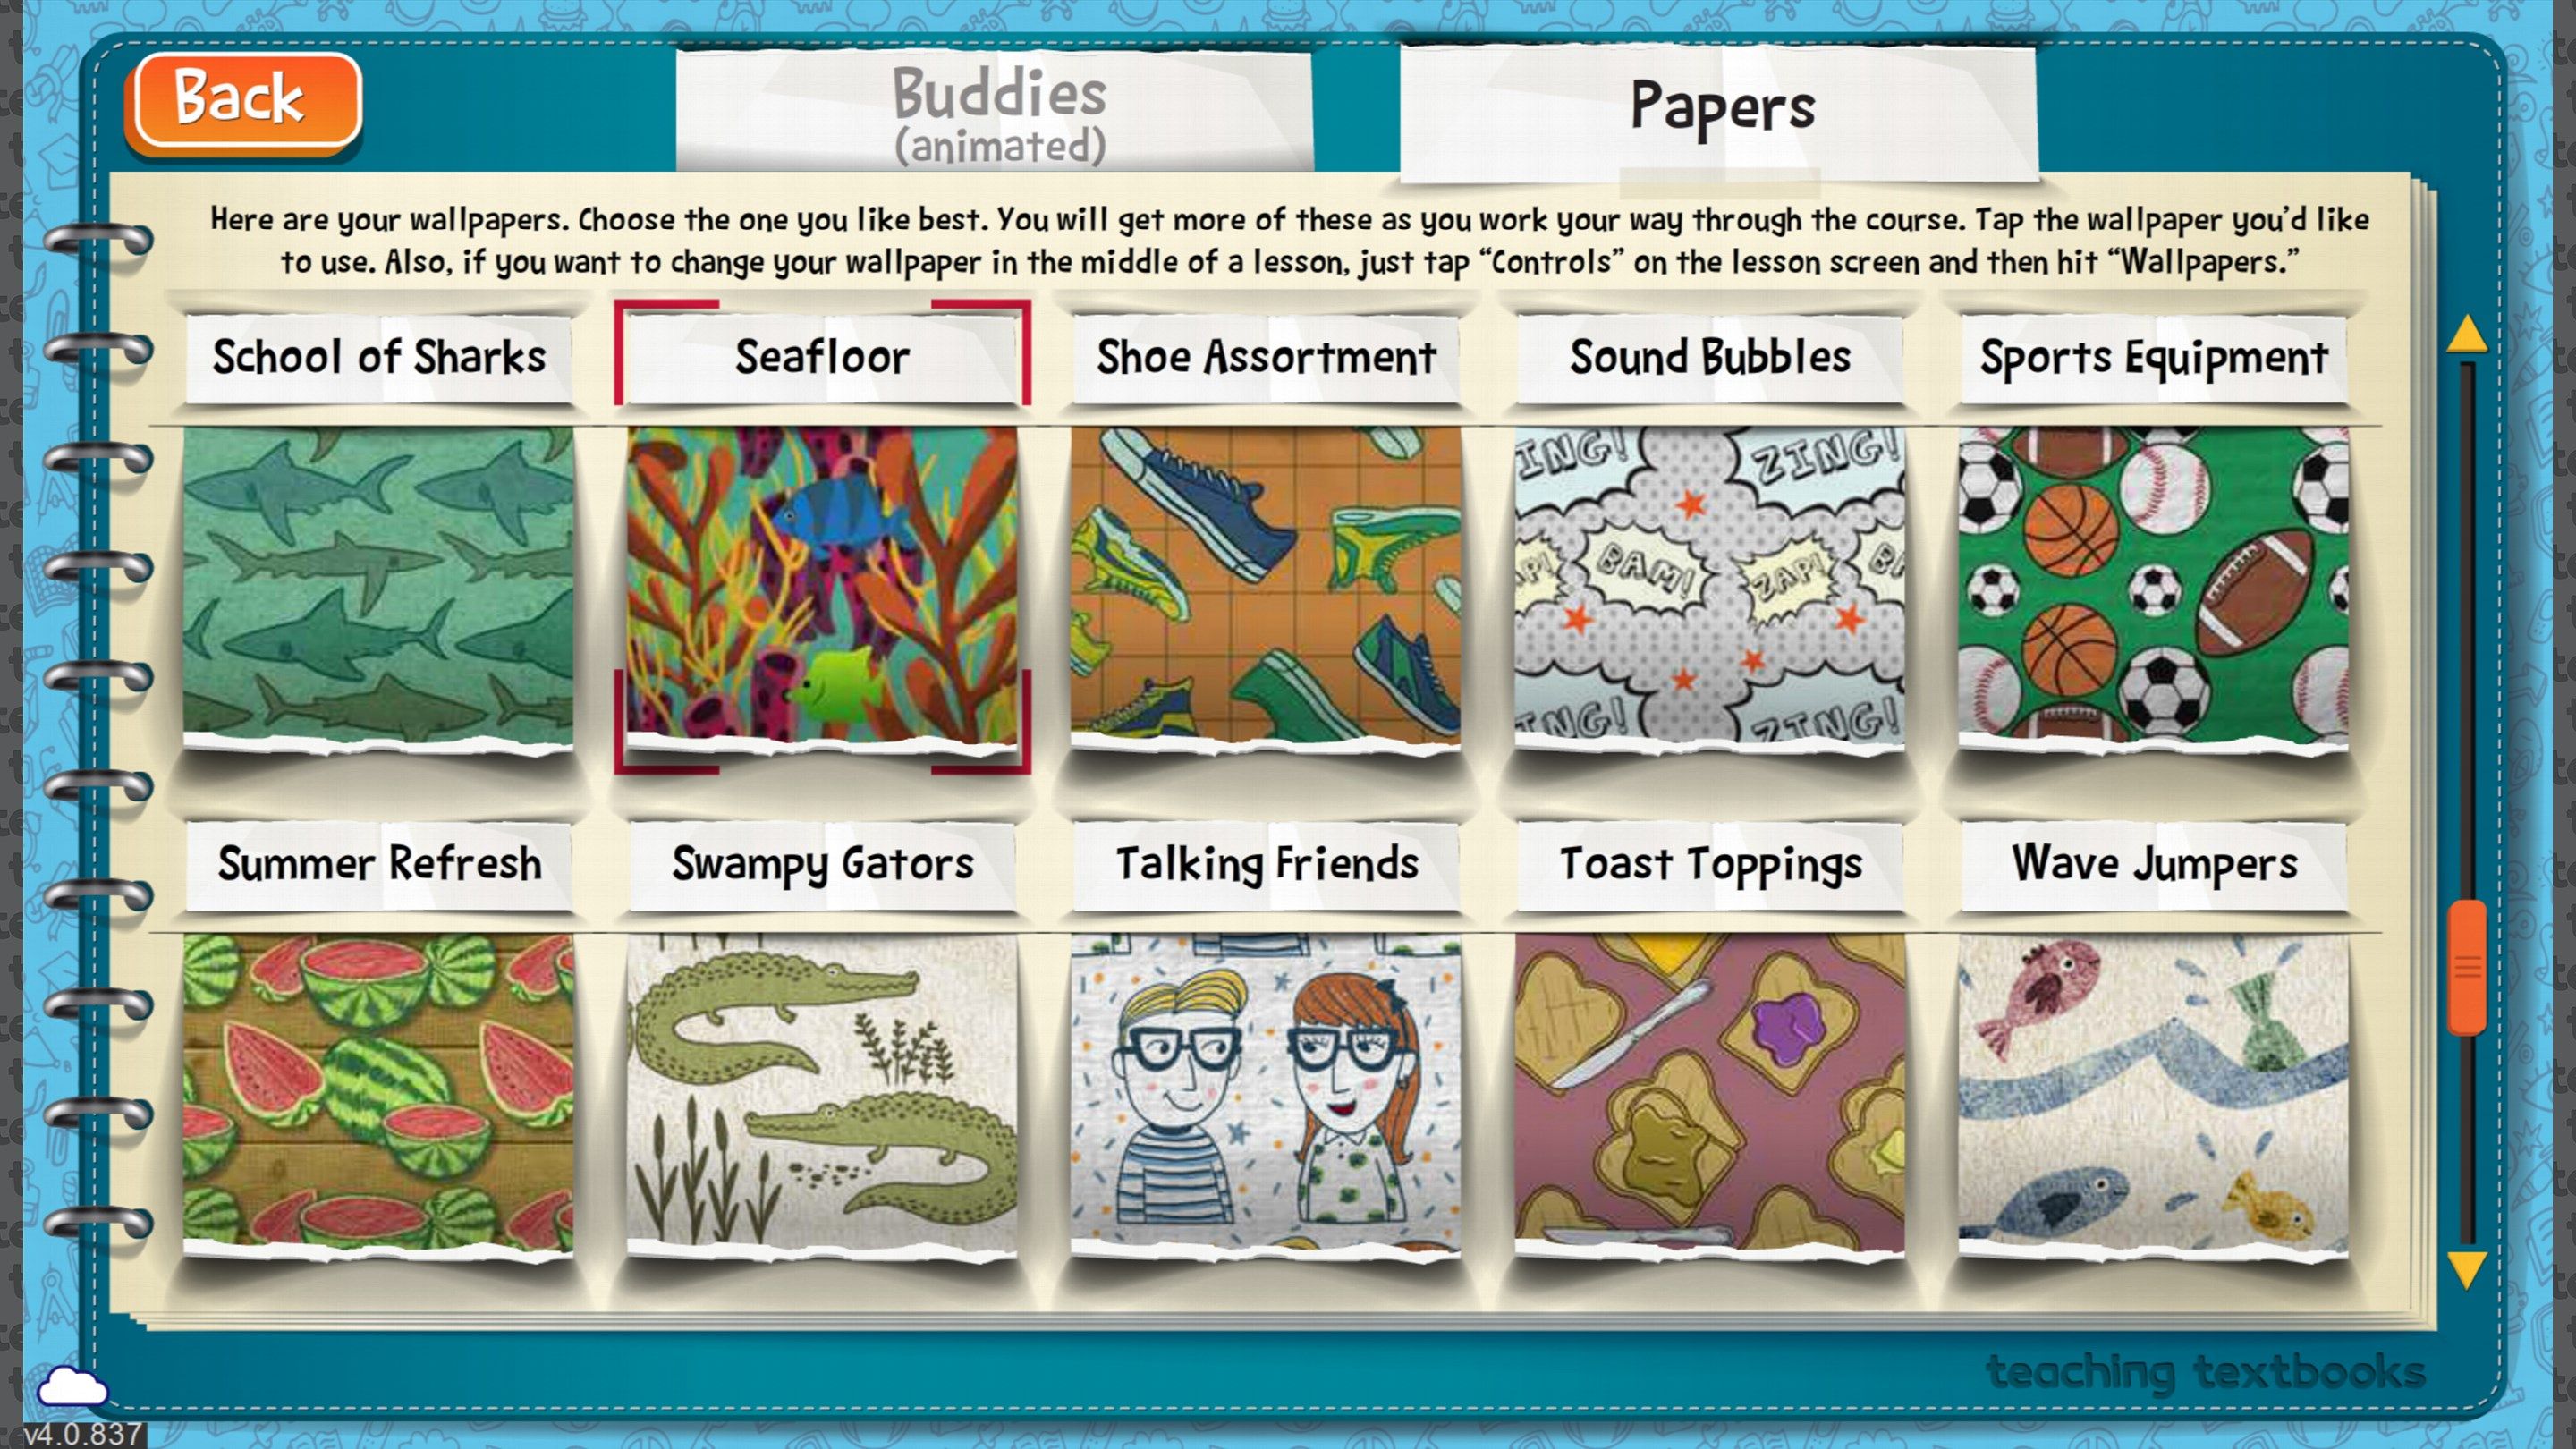 The student can customize how the app looks, with a wide selection of beautiful wallpapers, and fun virtual “Buddies.”